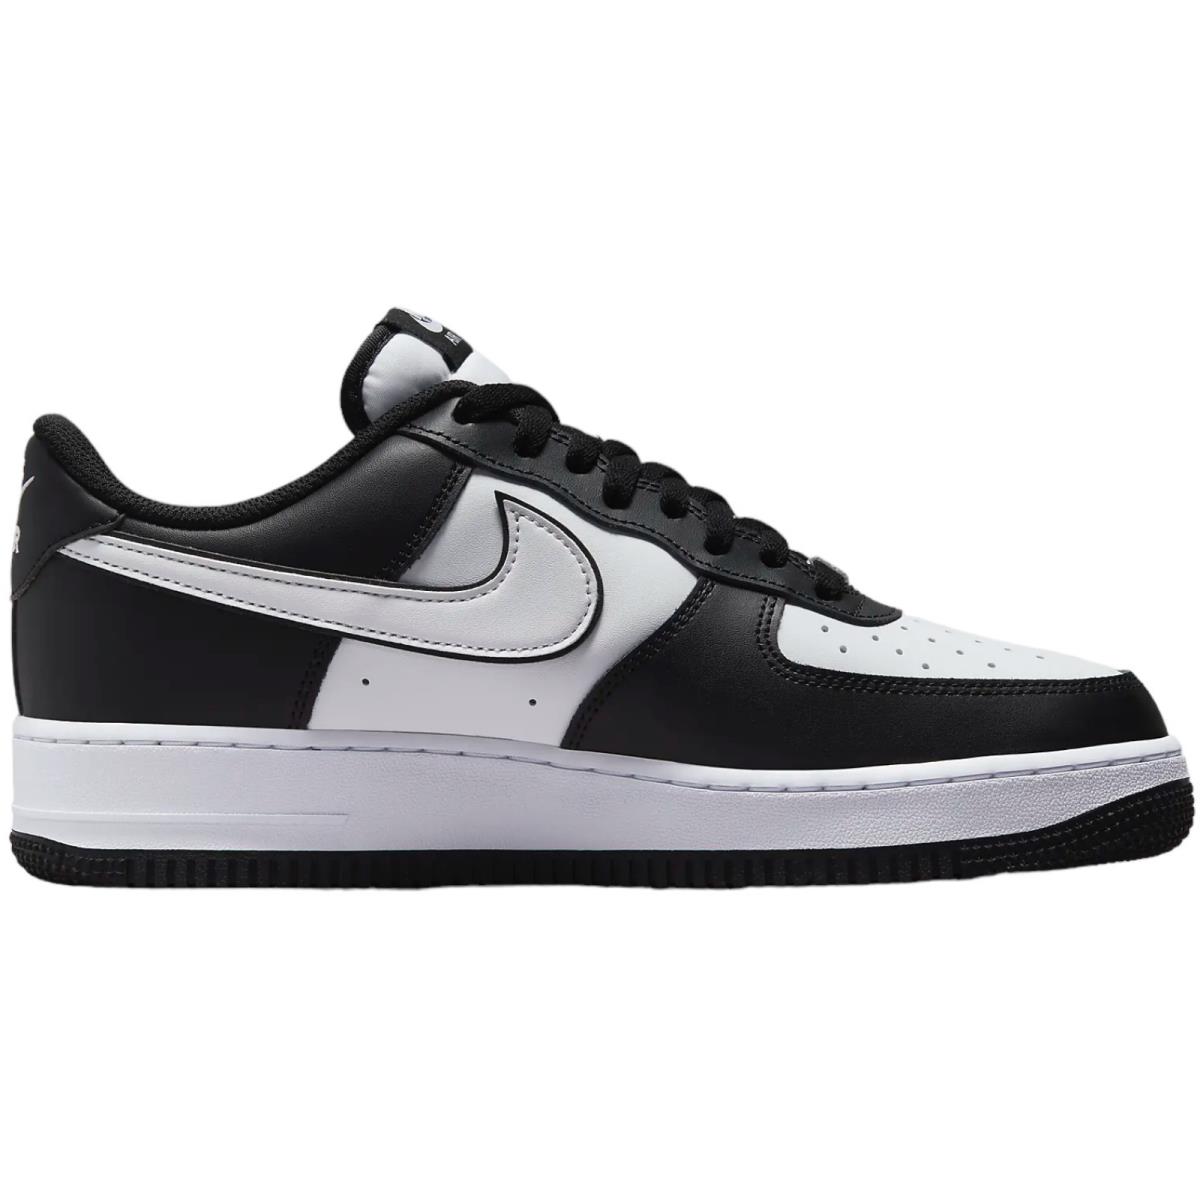 Nike Air Force 1 `07 Men`s Casual Shoes All Colors US Sizes 7-14 Black/Black/White